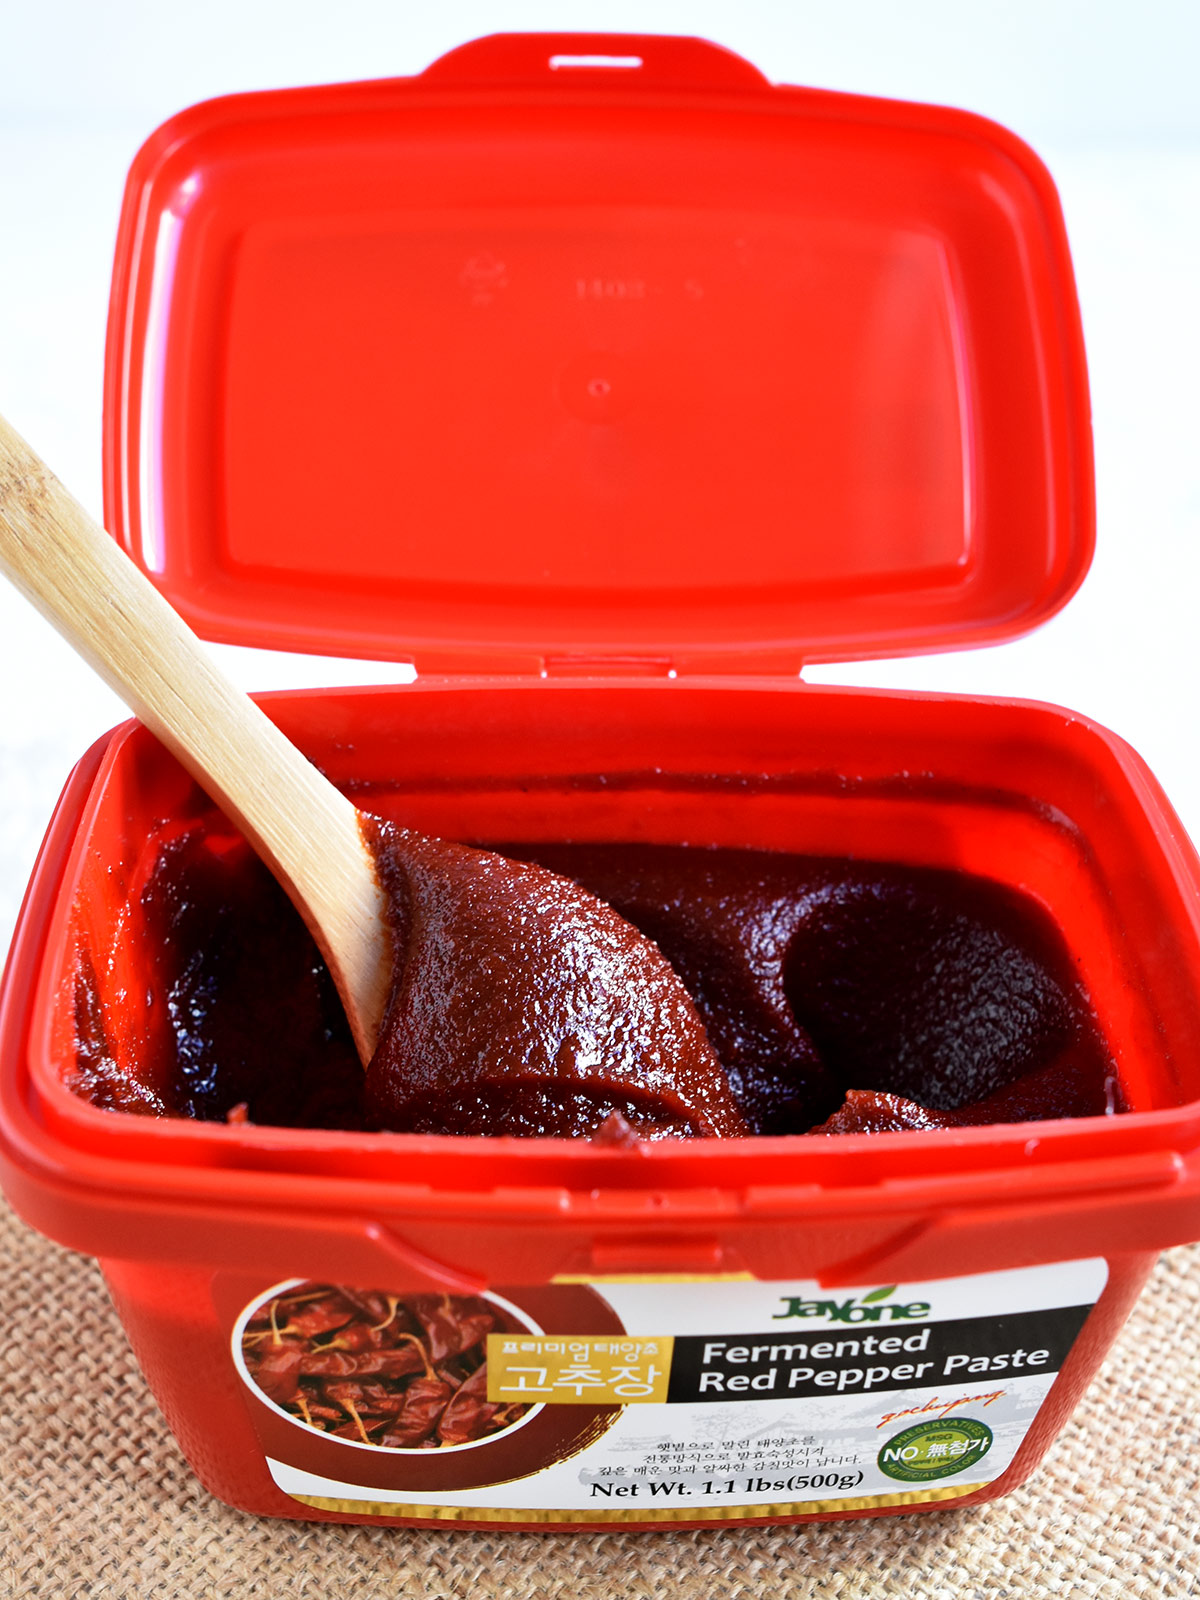 Gochujang on a wooden spoon in a red container.